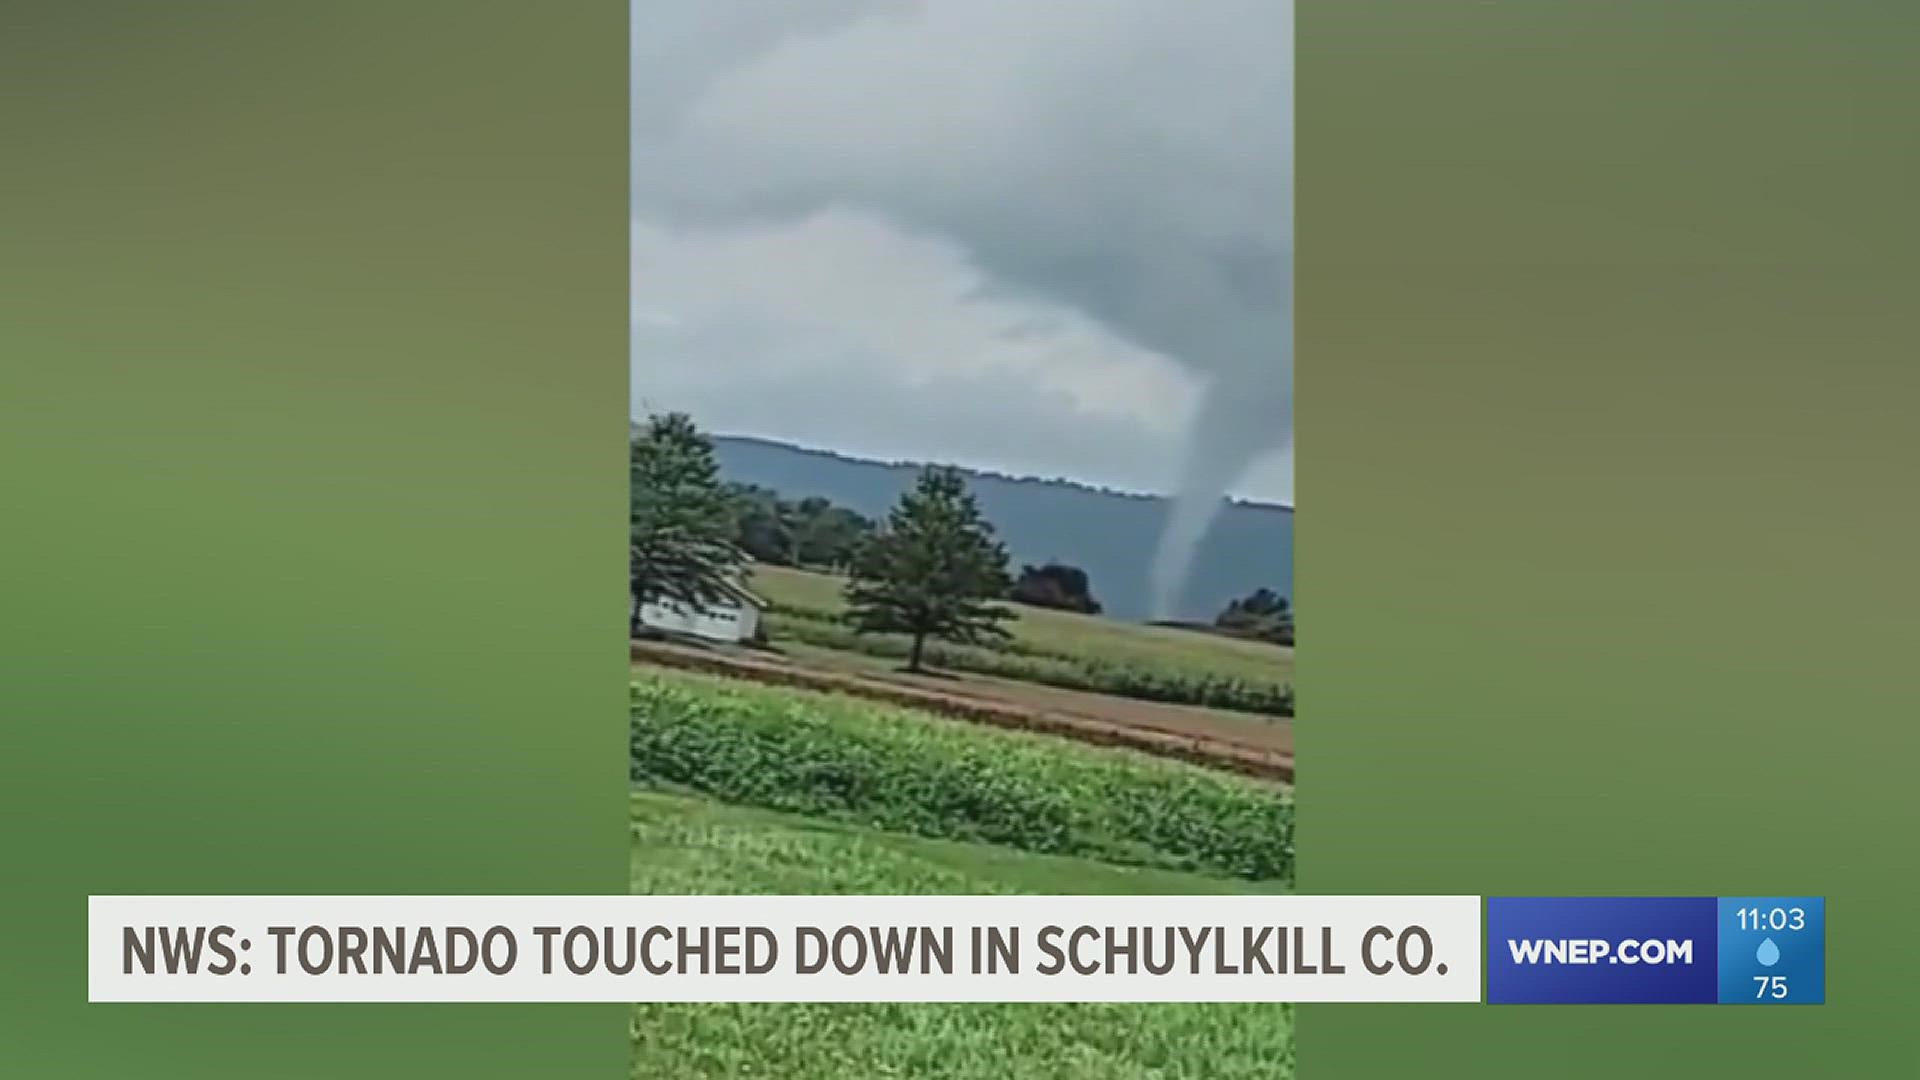 So far, there have not been any reports of major damage as a result of the suspected tornado in Schuylkill County.